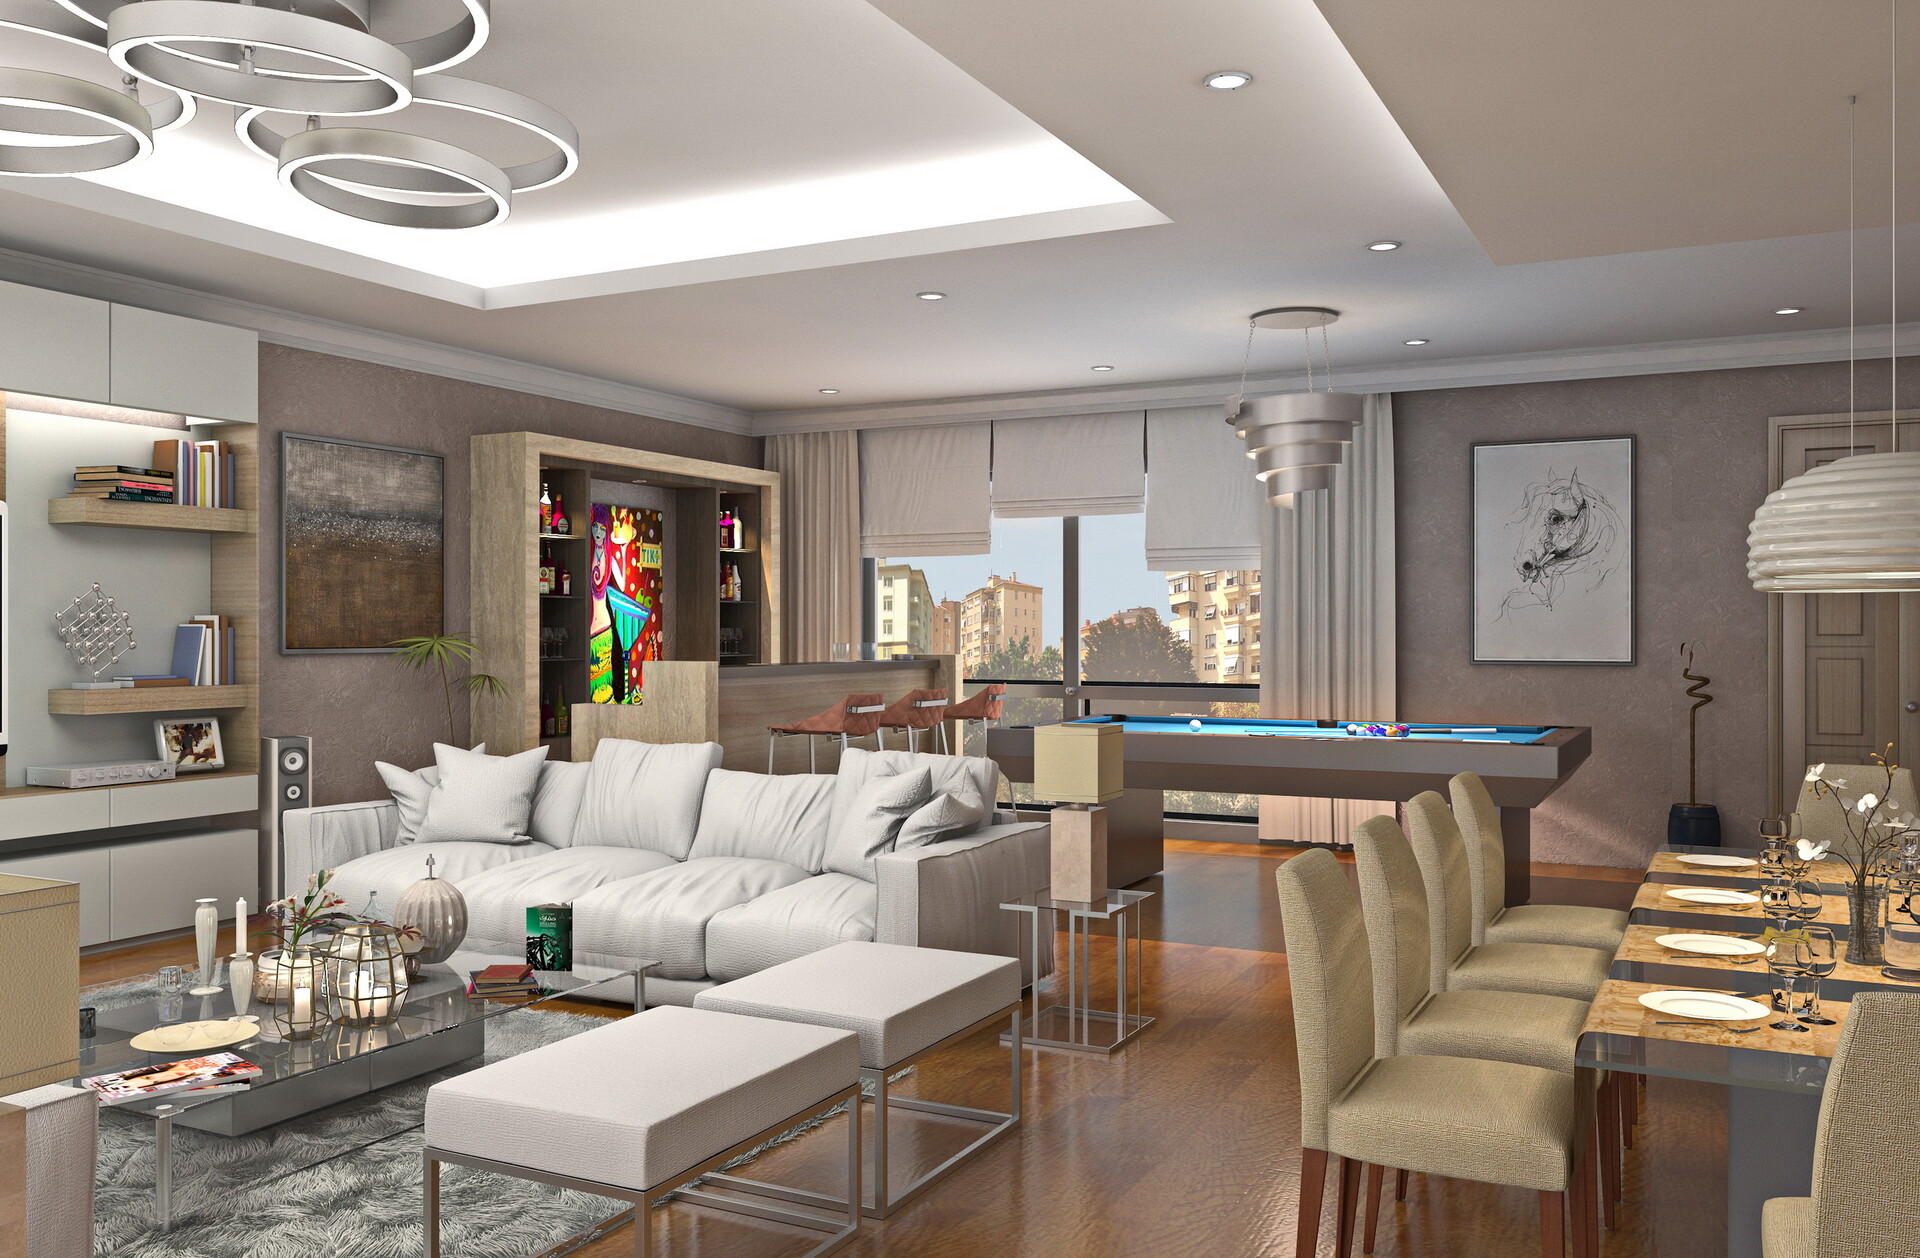 Rendforce Cg Interior Renderings And Decoration Ideas For